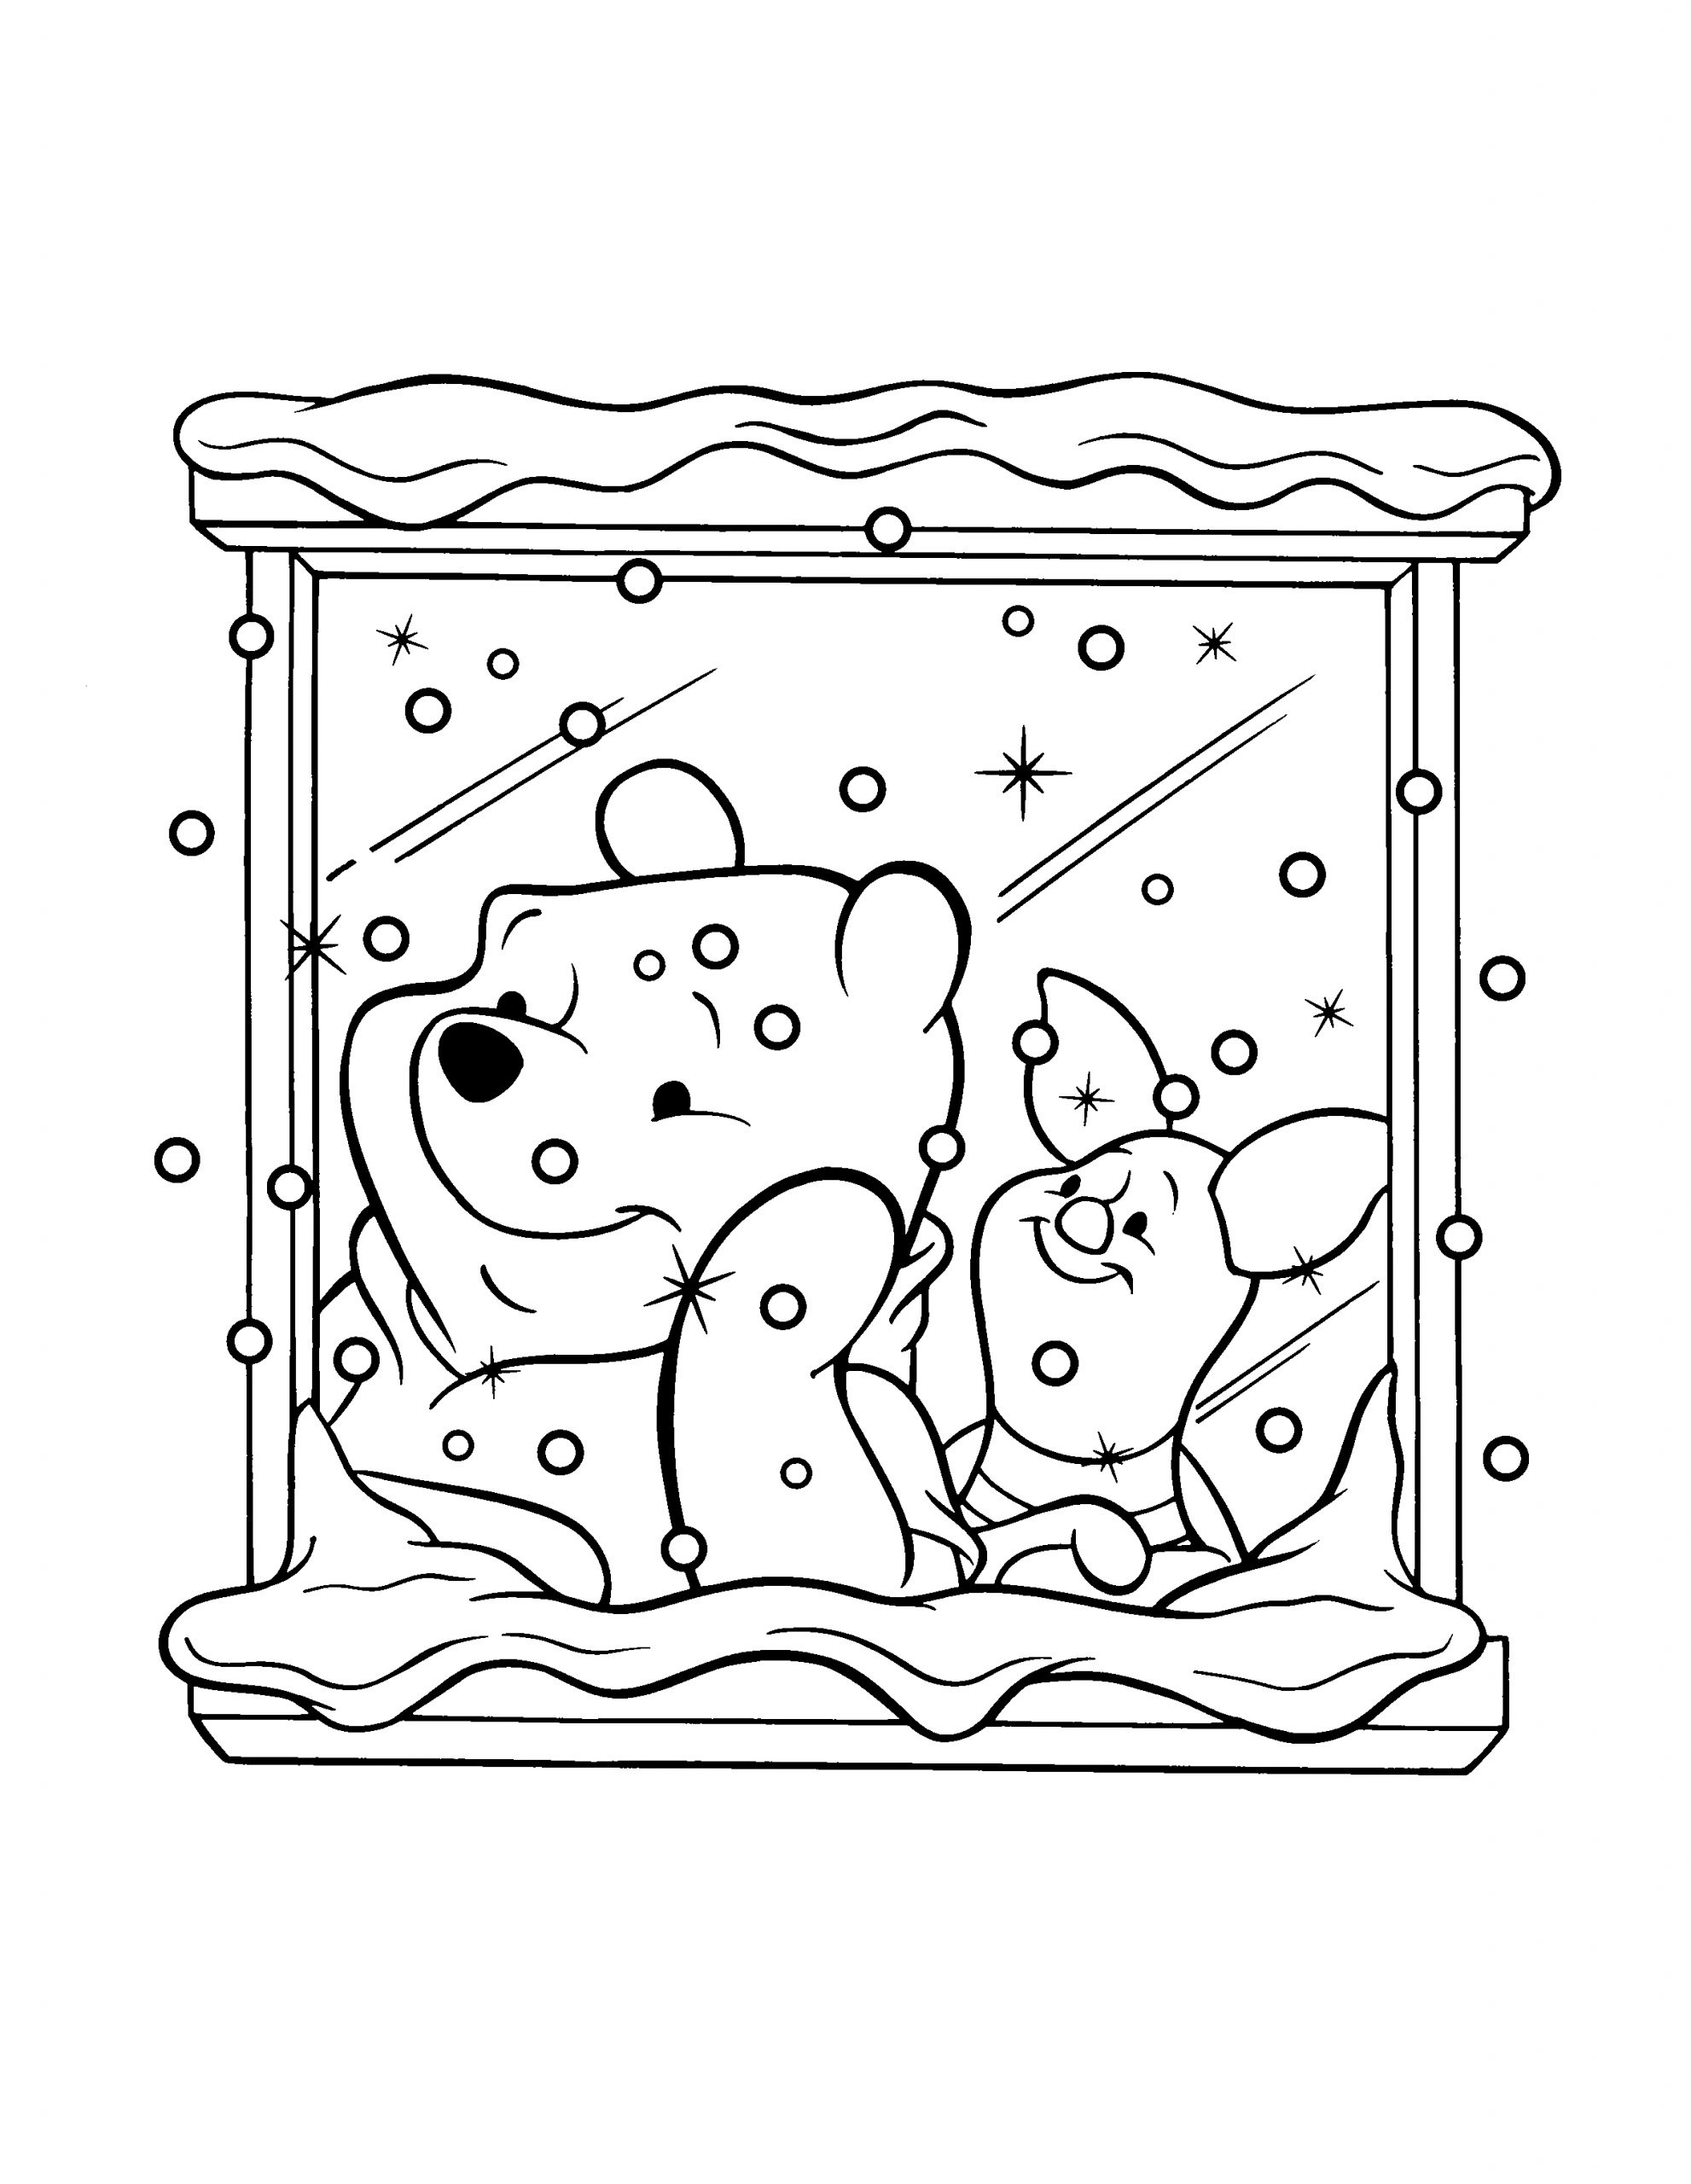 Ladybug korea coloring pages Free pictures of china flag download free clip  art free clip art | Antonetta.captainamericagifts.com